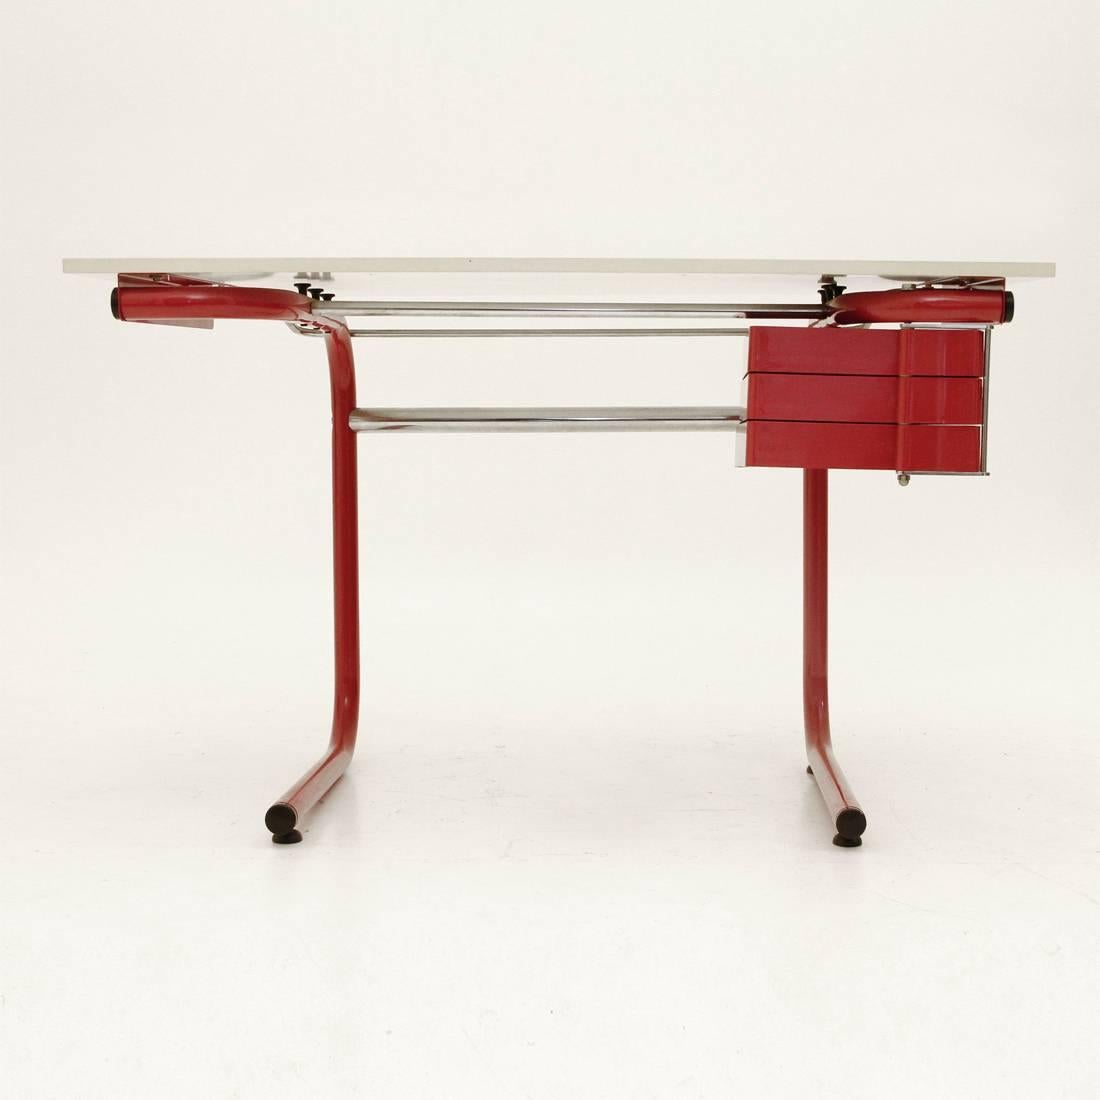 Desk or drafting table designed by Joe Colombo in 1967 for the company Bieffeplast.
Painted tubular metal structure.
Adjustable chipboard top covered in white laminate, plastic drawers.
Good vintage condition.